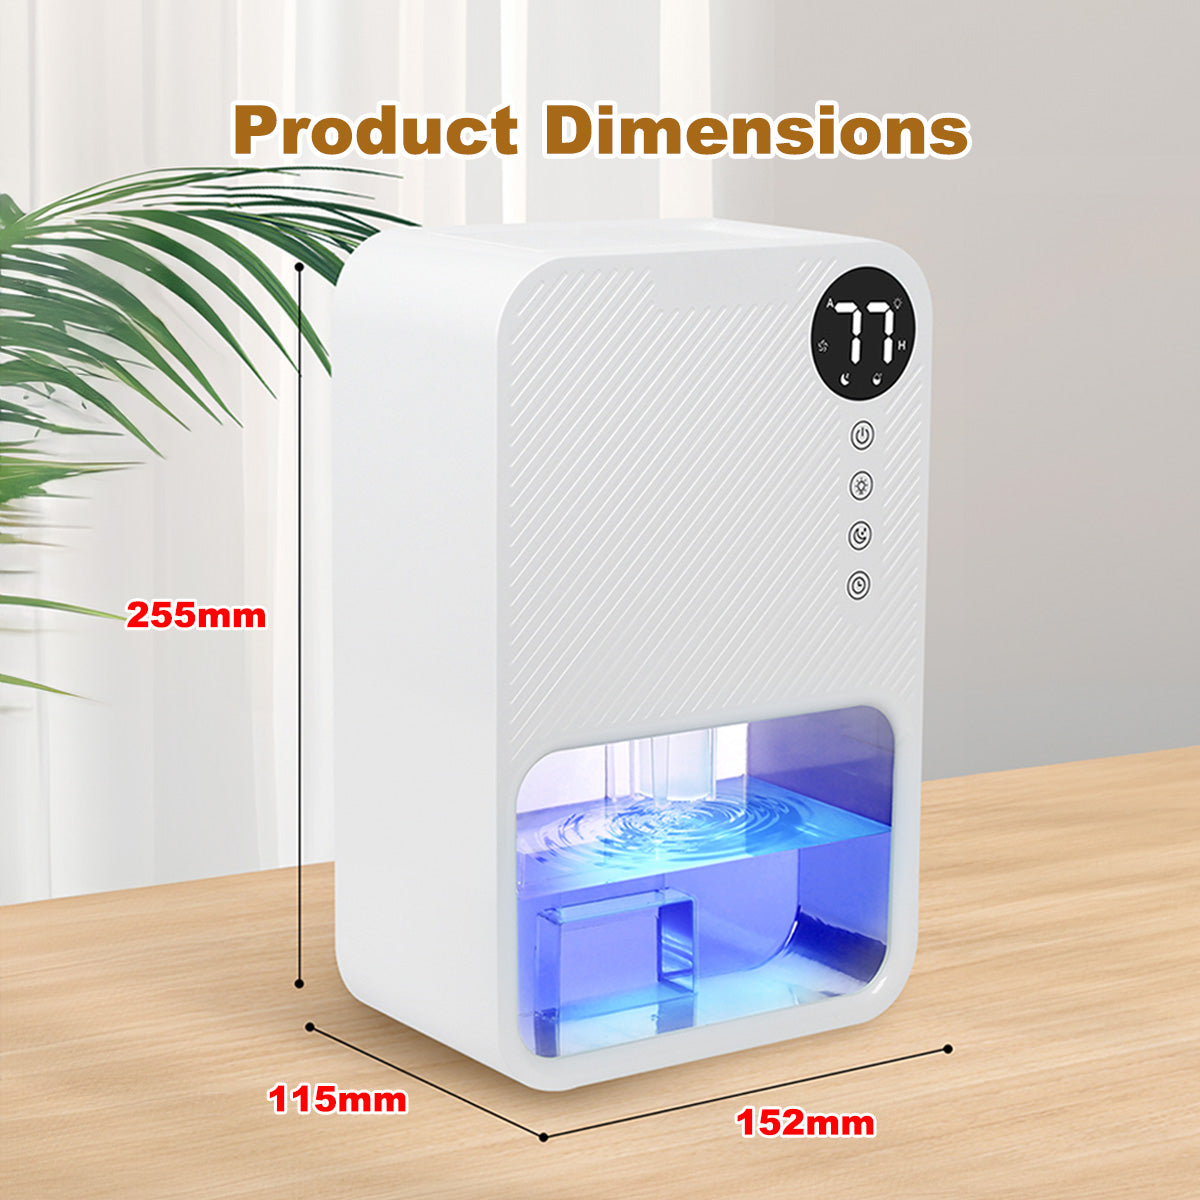 iFan Electric Dehumidifier 1.1L Mini Dehumidifier Thirsty Hippo Timer Setting 1-24h Low Noise Water Full Auto OFF (IF3252)